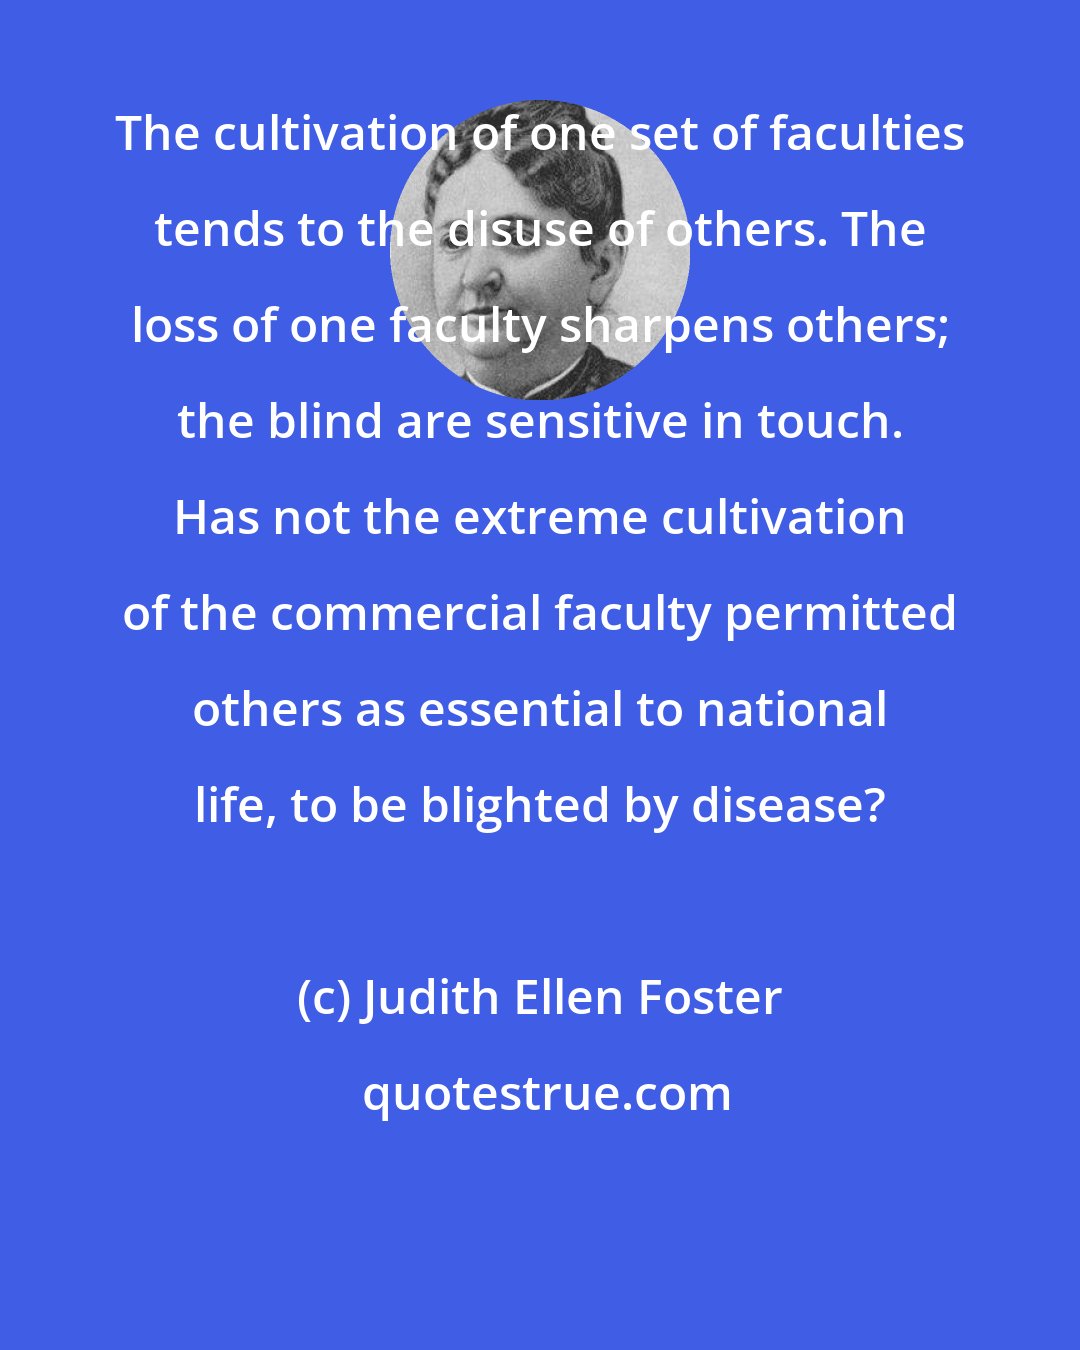 Judith Ellen Foster: The cultivation of one set of faculties tends to the disuse of others. The loss of one faculty sharpens others; the blind are sensitive in touch. Has not the extreme cultivation of the commercial faculty permitted others as essential to national life, to be blighted by disease?